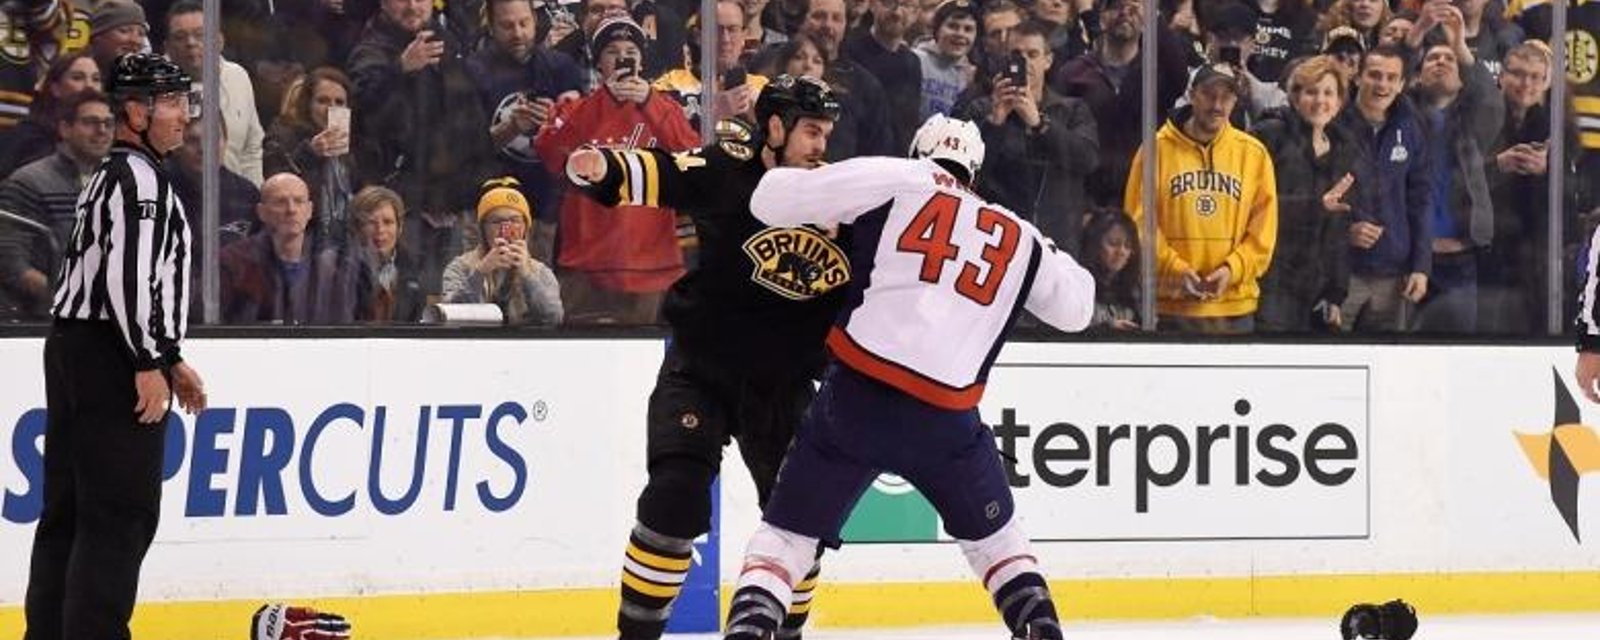 Thornton and McQuaid throw down in a heavyweight bout.